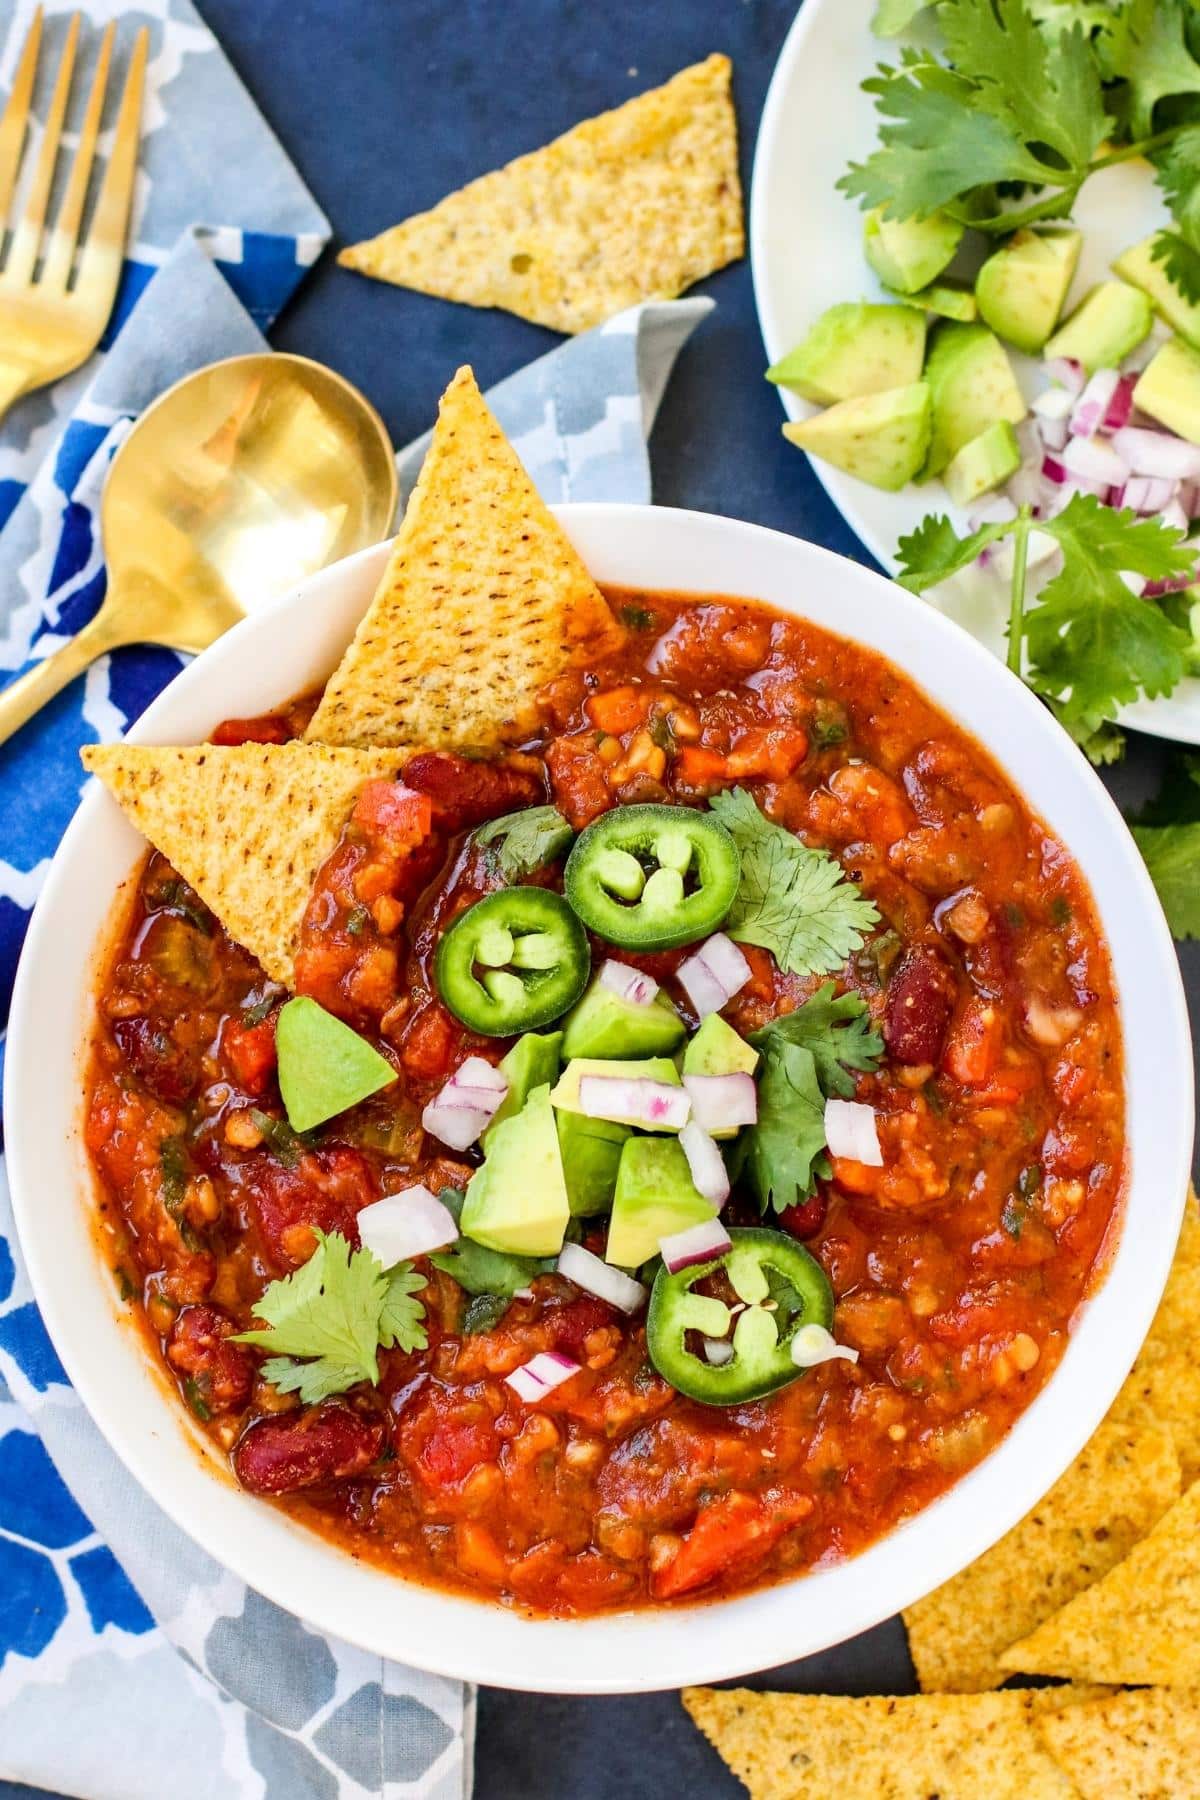 Bowl of red lentil chili garnished with jalapeno pepper slices, diced avocado, chopped red onion, and cilantro with tortilla chips and plate of toppings on the side.